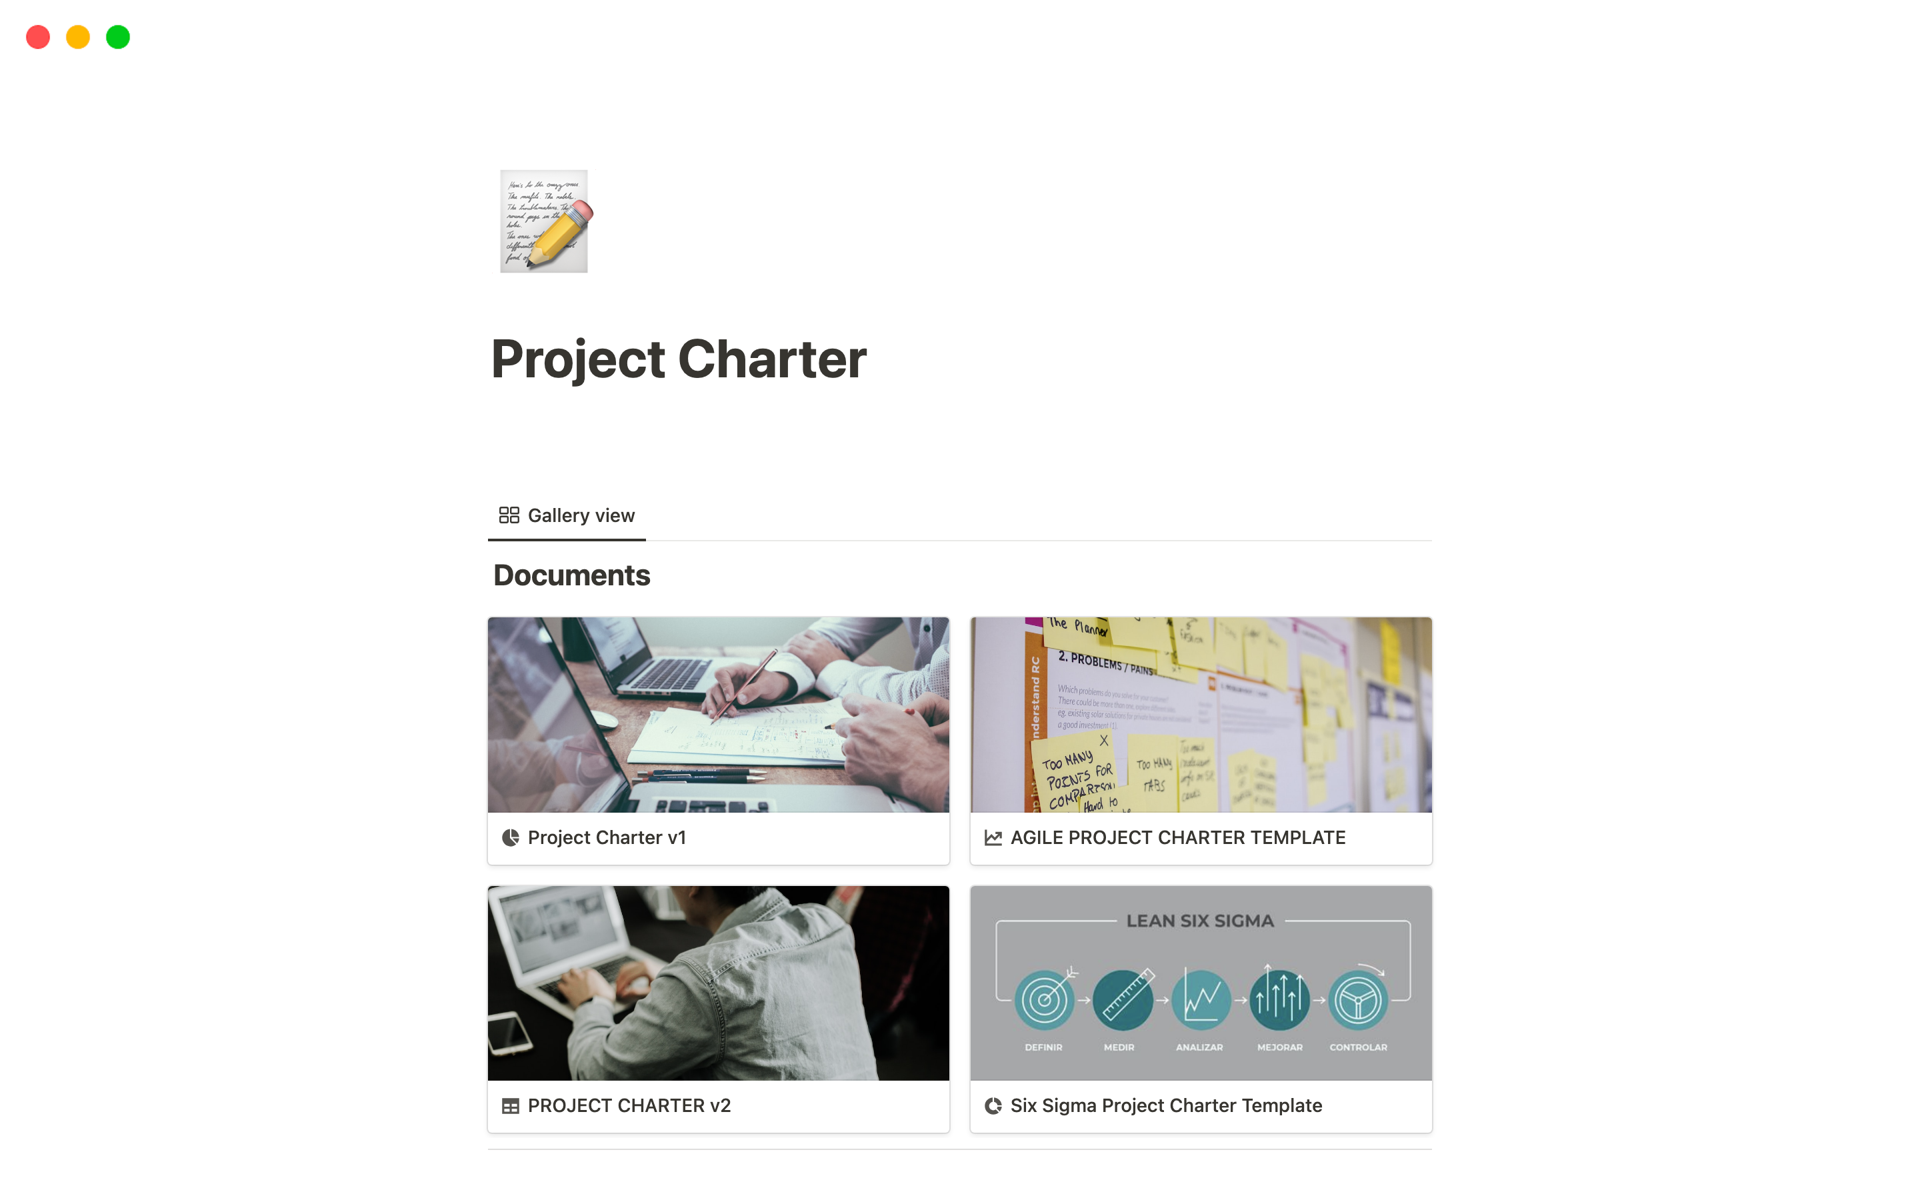 A project charter is a formal document that establishes the purpose, objectives, scope, and key stakeholders of a project.